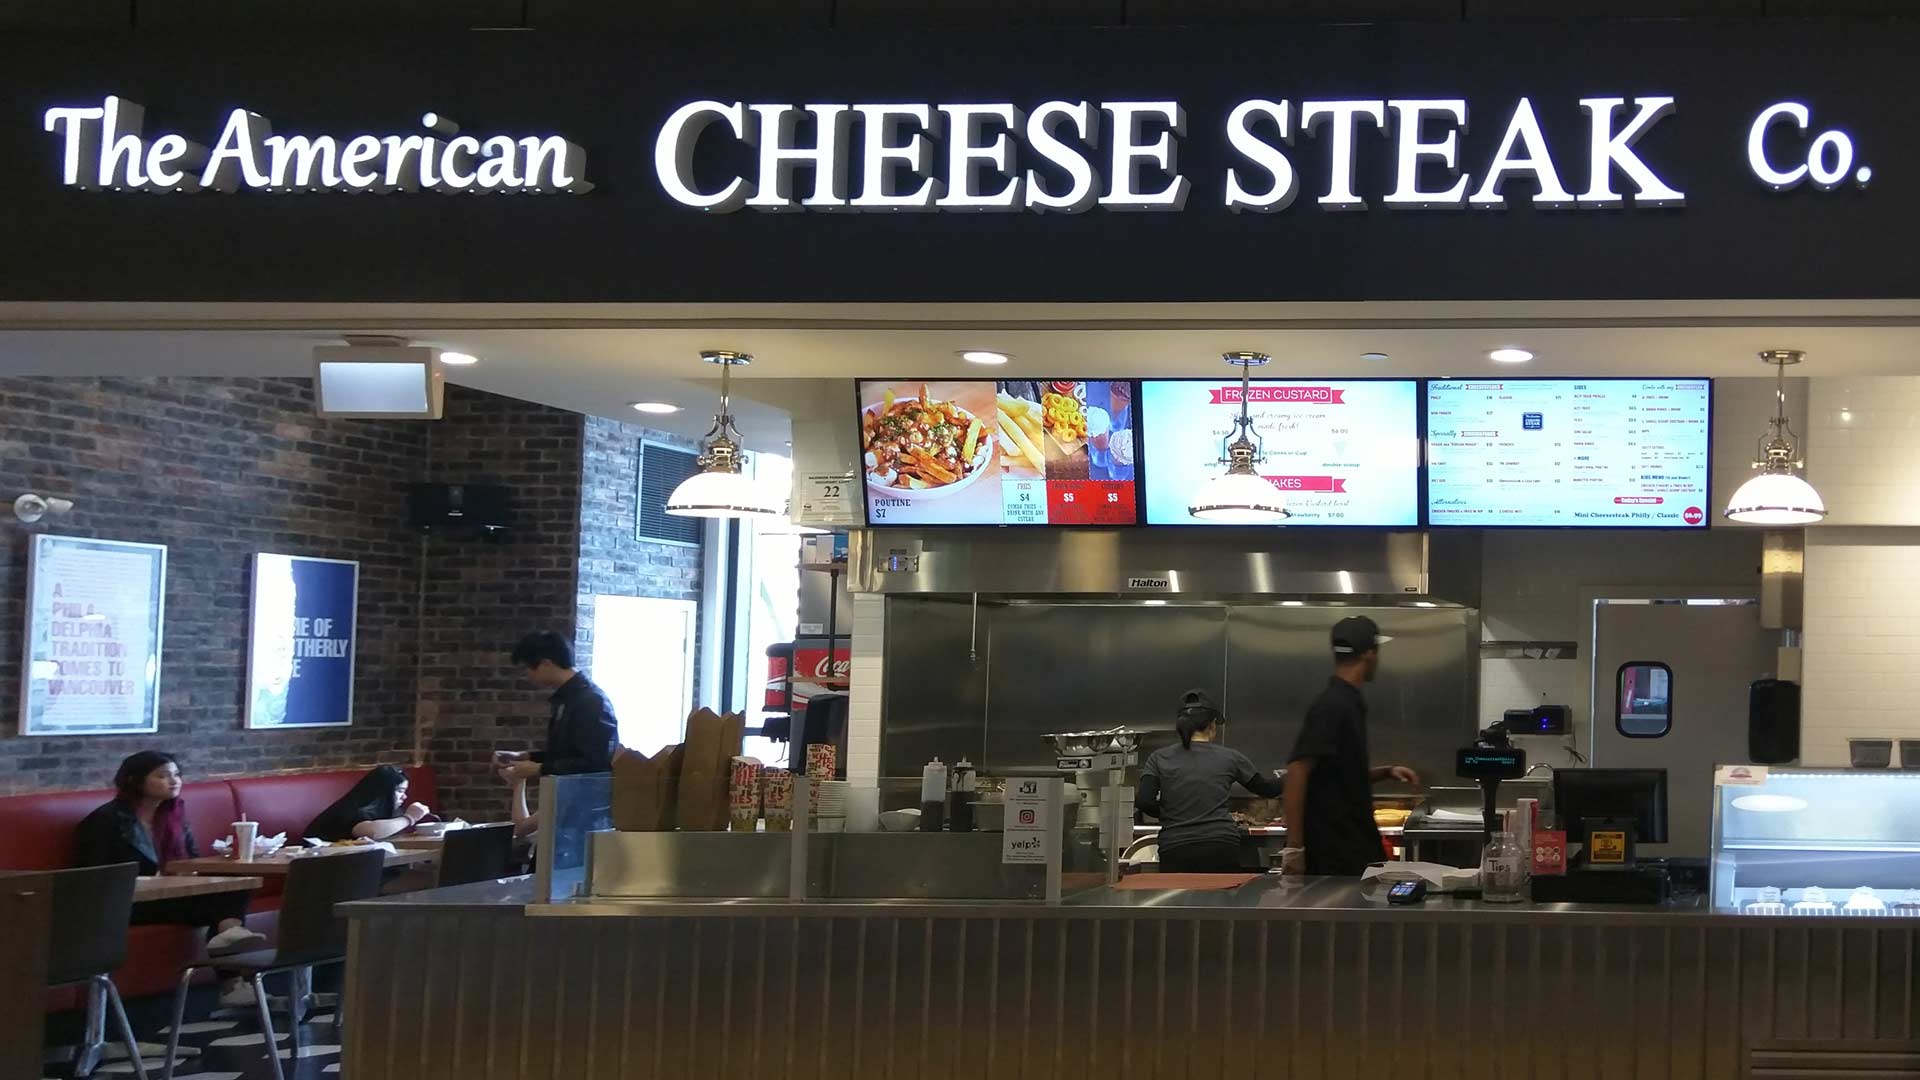 Front of the American Cheese Steak Co quick service restraurant with digital menu board mounted above the counter